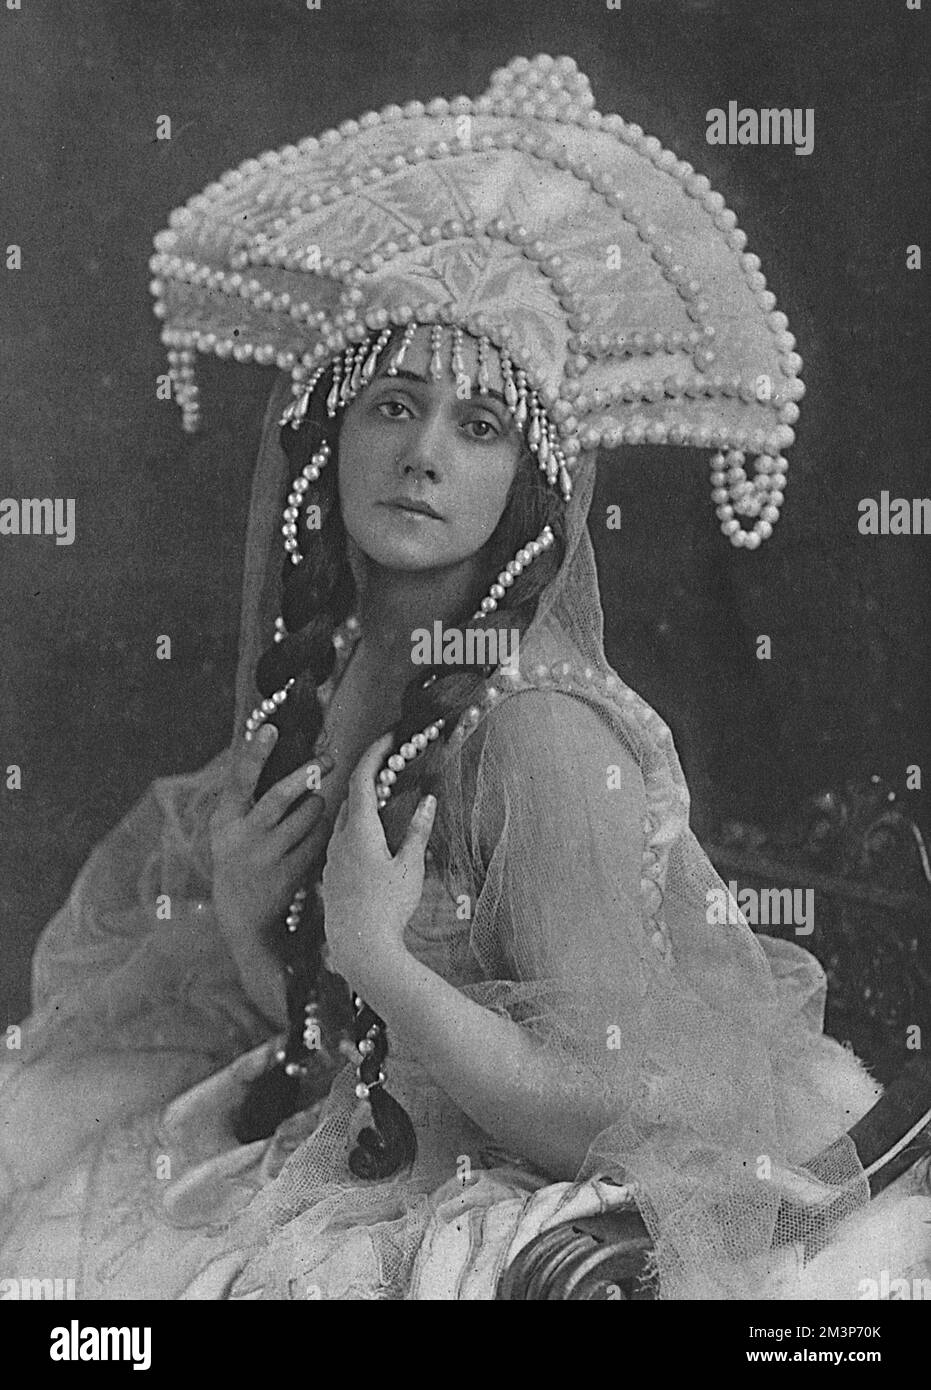 Tamara Karsavina (1885-1978), Russian ballet dancer, who, in 1919, at the time of this photograph, had been performing with the Russian Ballet at the Alhambra Theatre in London.       Date: 1919 Stock Photo